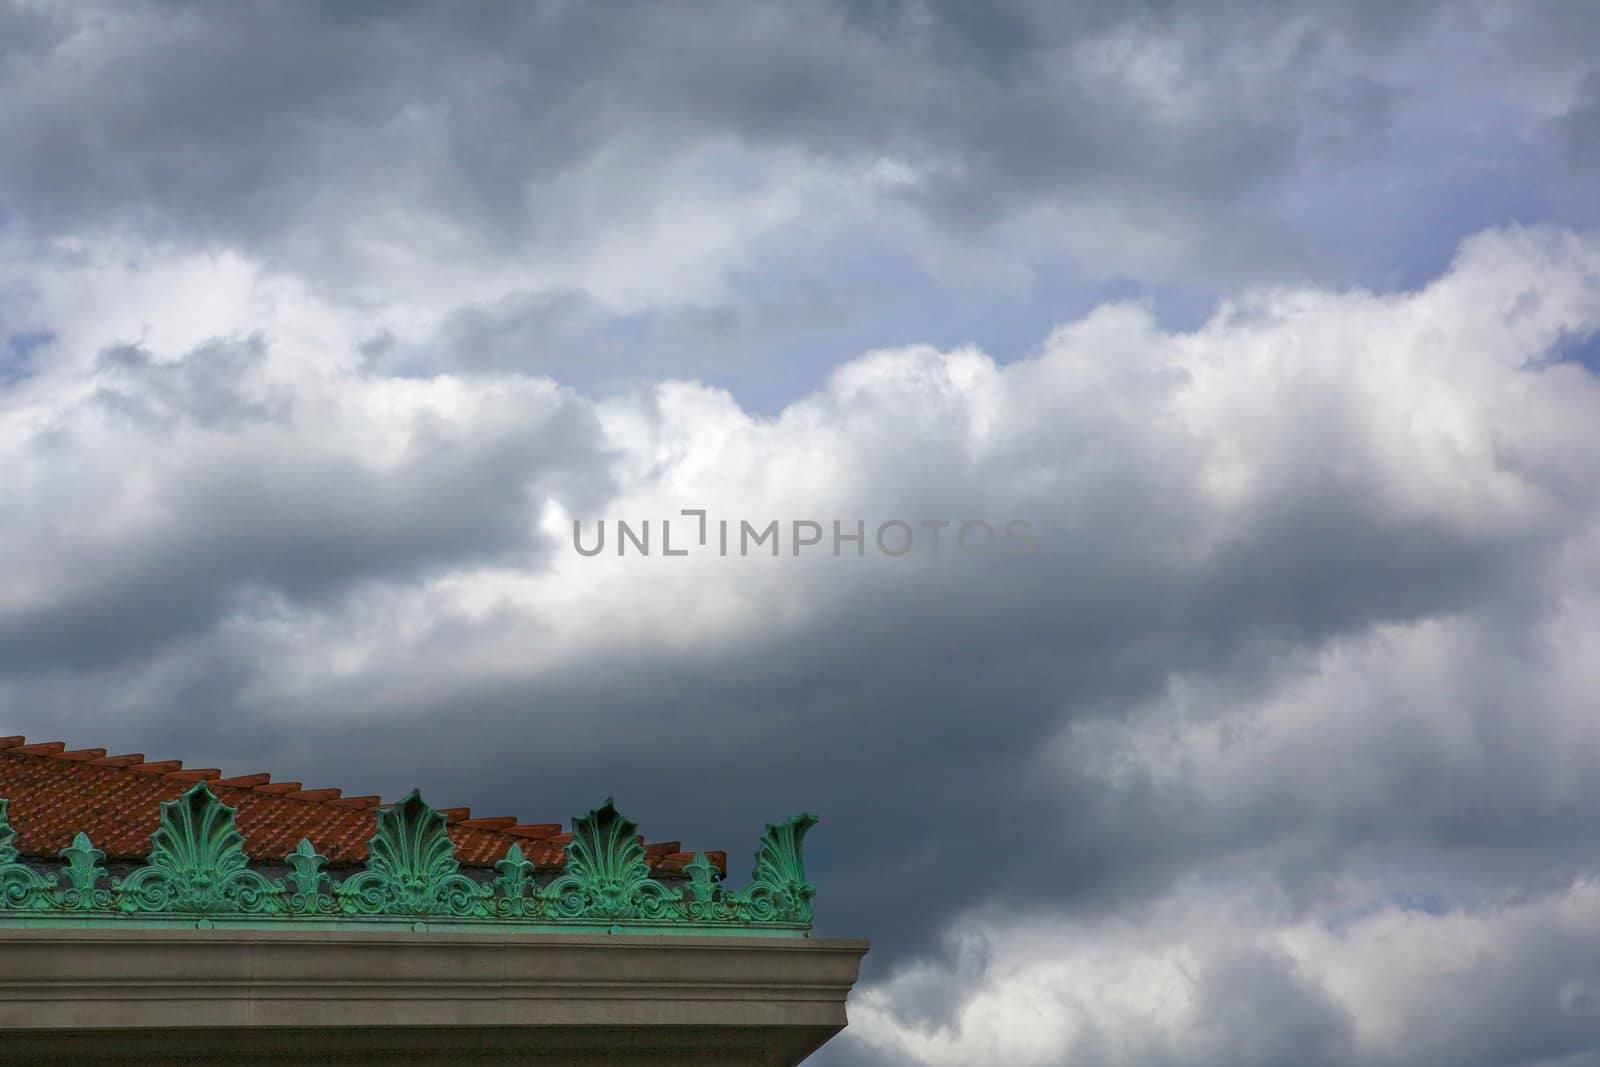 Stormy skys over Ornate roof by bobkeenan